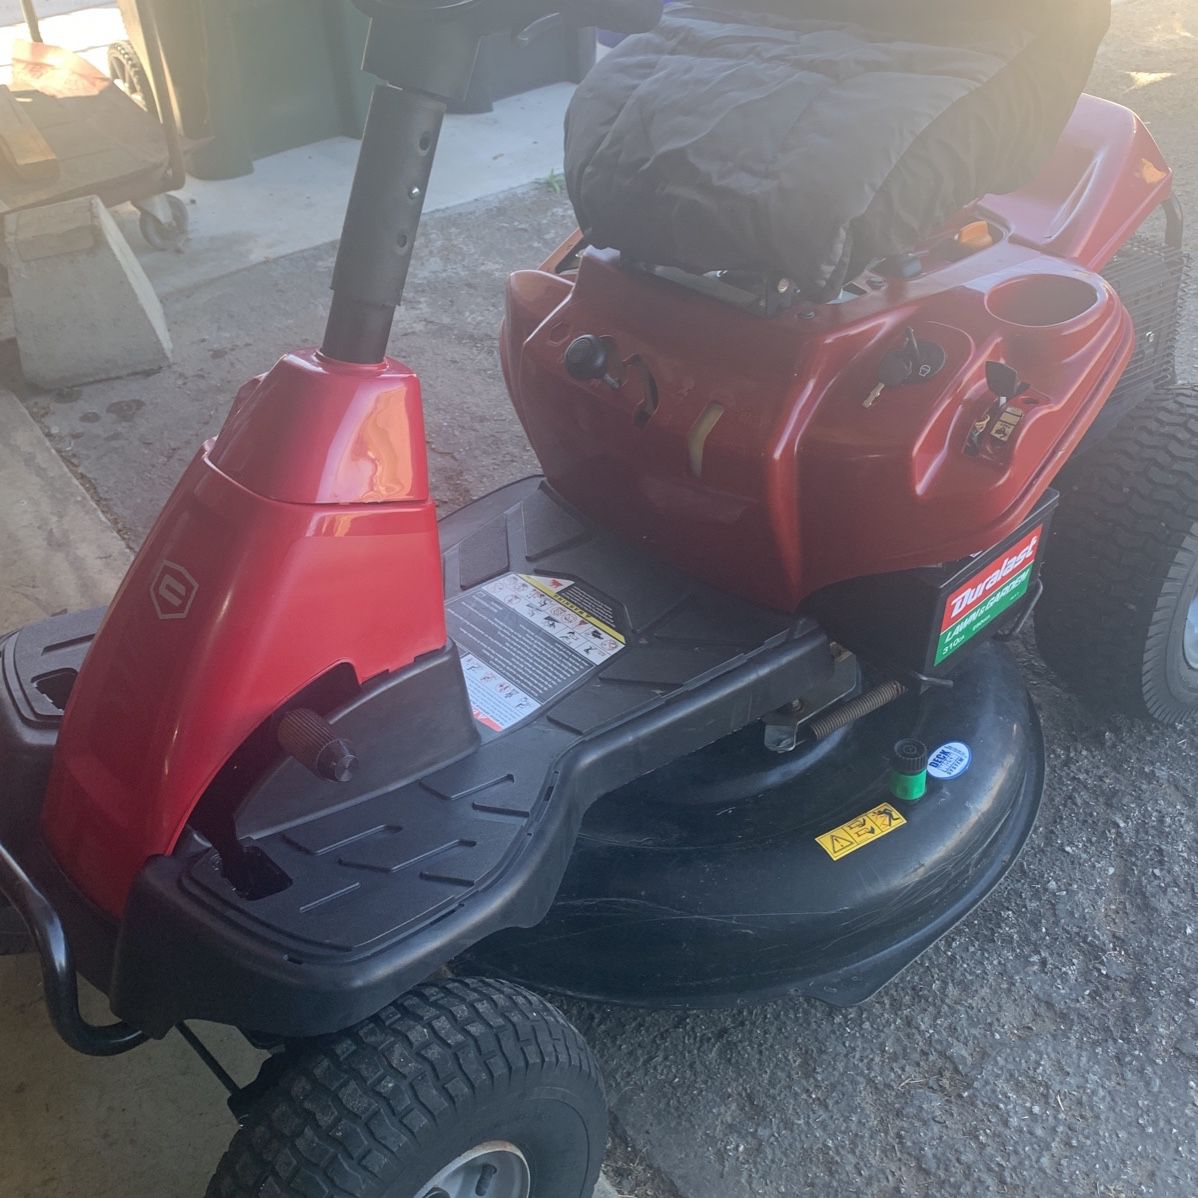 Mower 30" Craftsman 1000 Riding Mower Excellent Condition New Battery New Blade New Seat